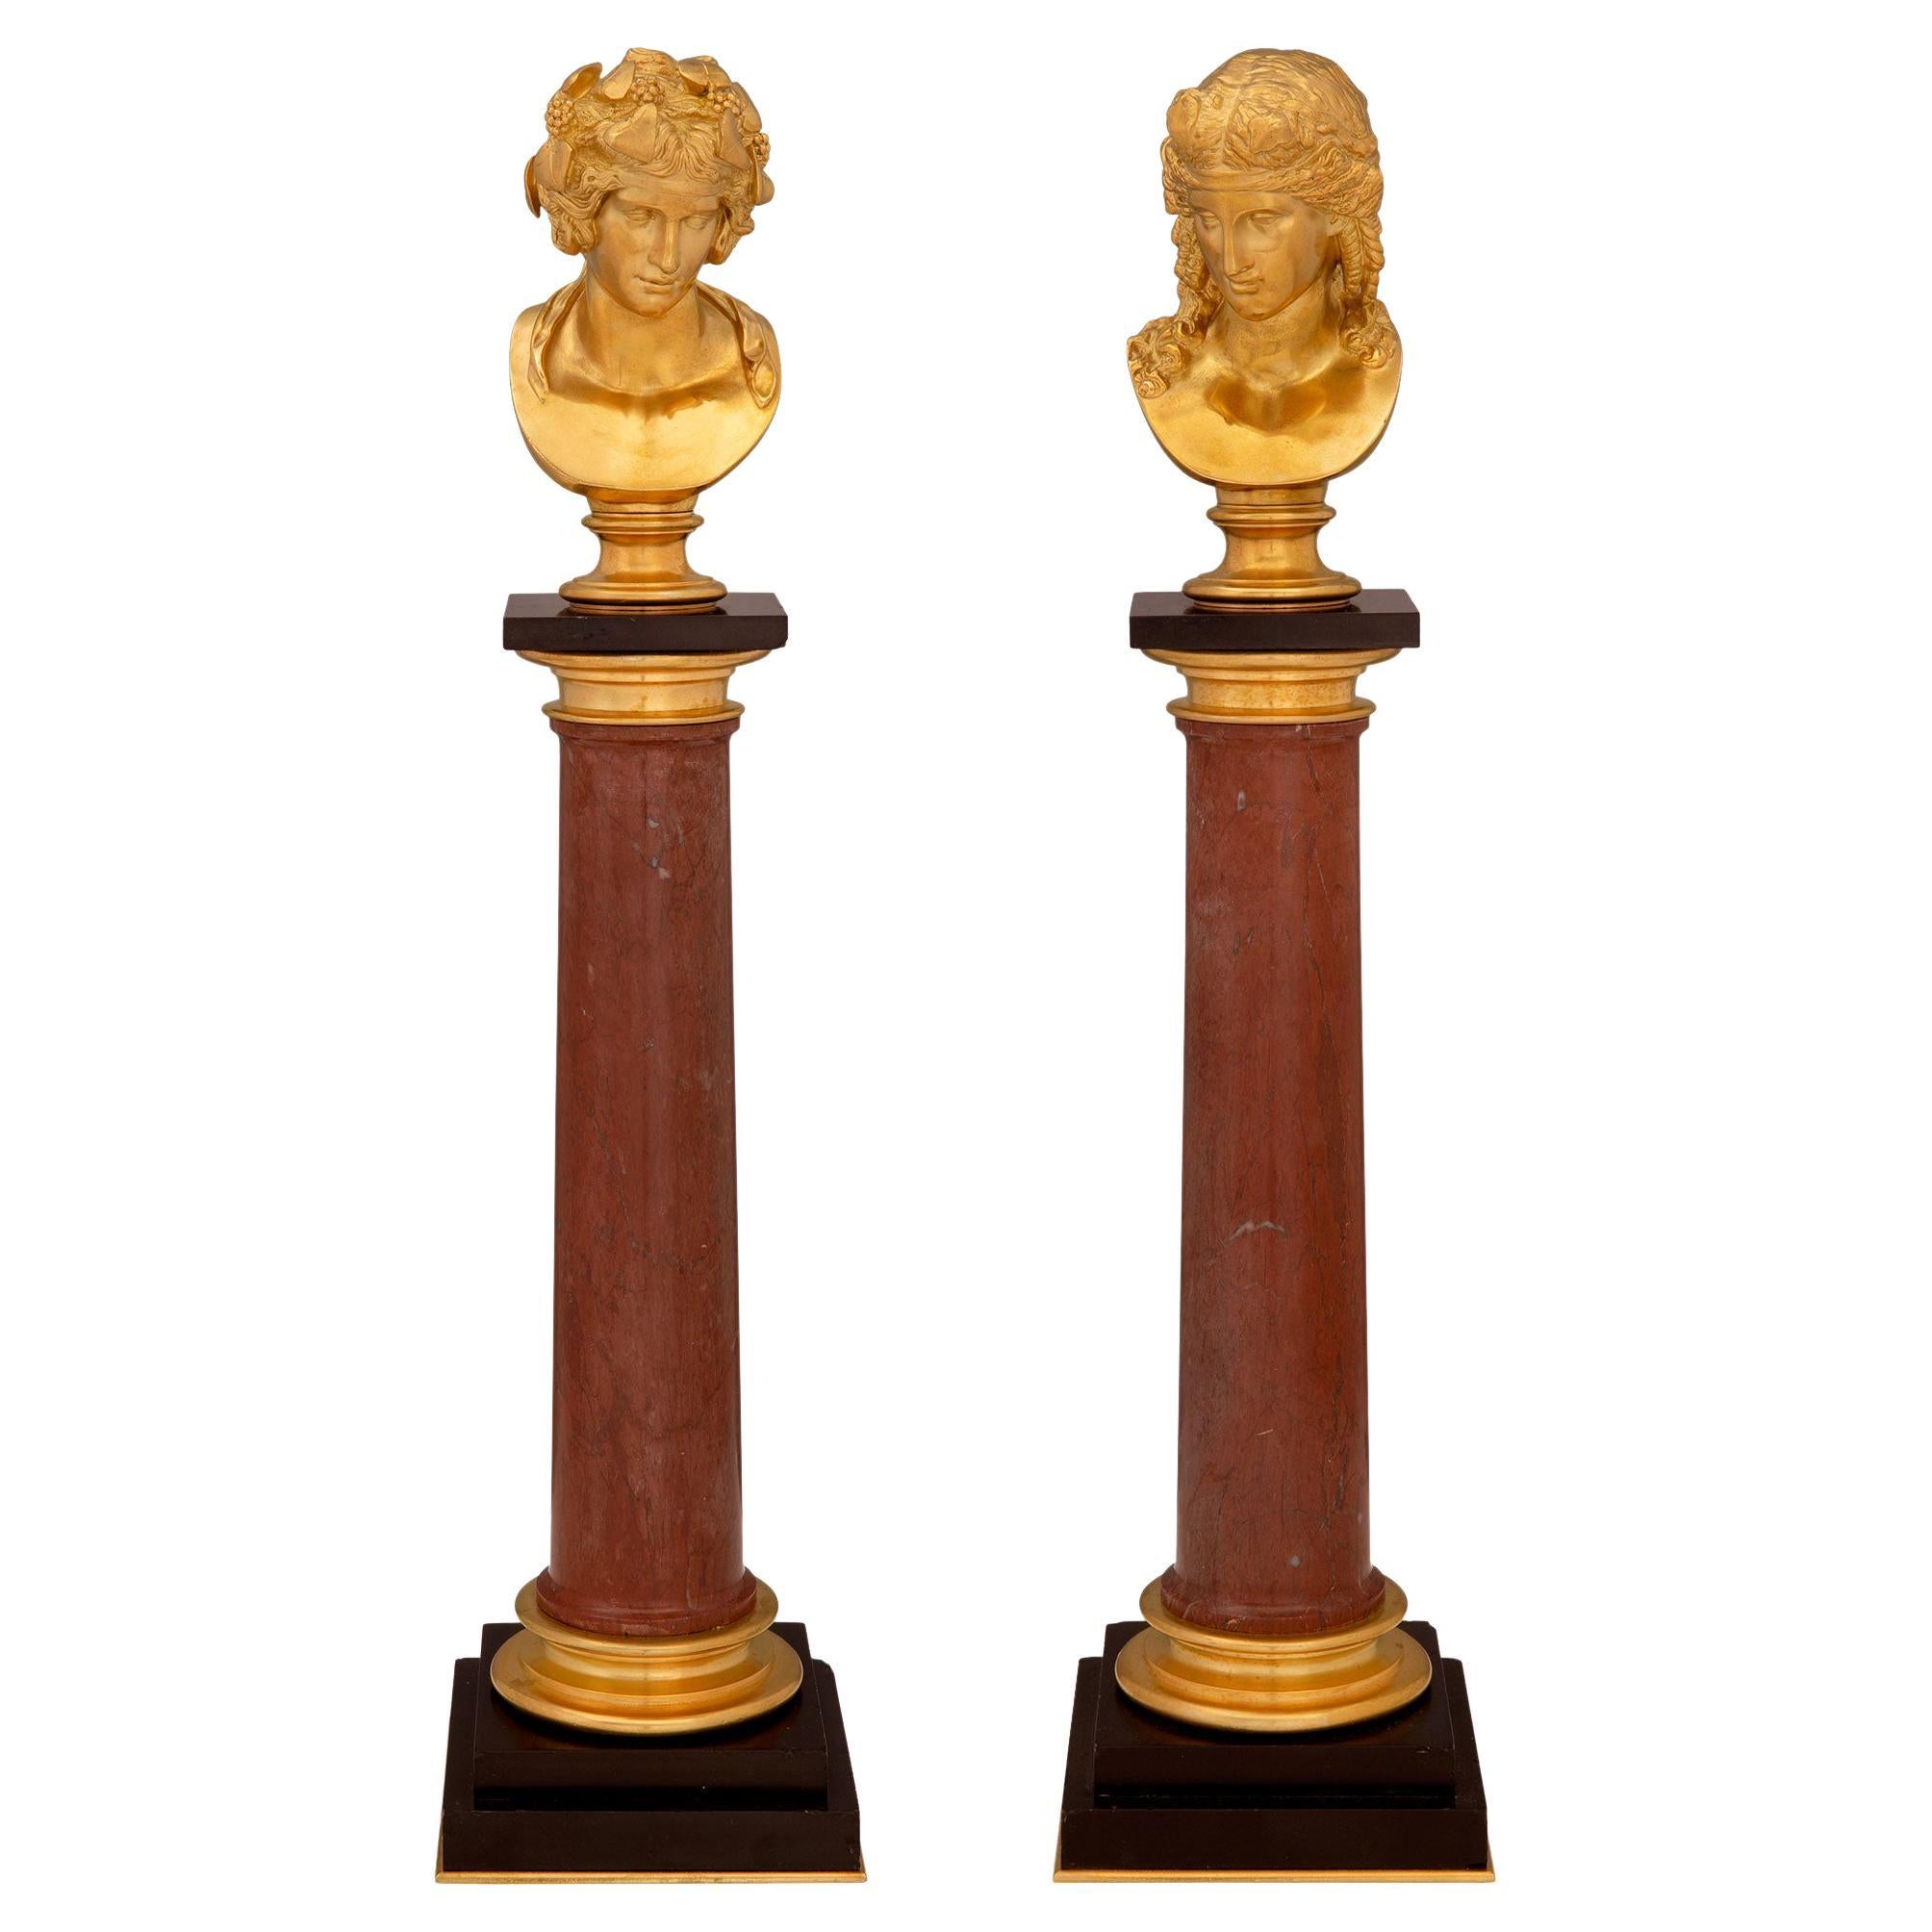 Italian 19th Century Neoclassical Style Ormolu and Marble Columns with Busts